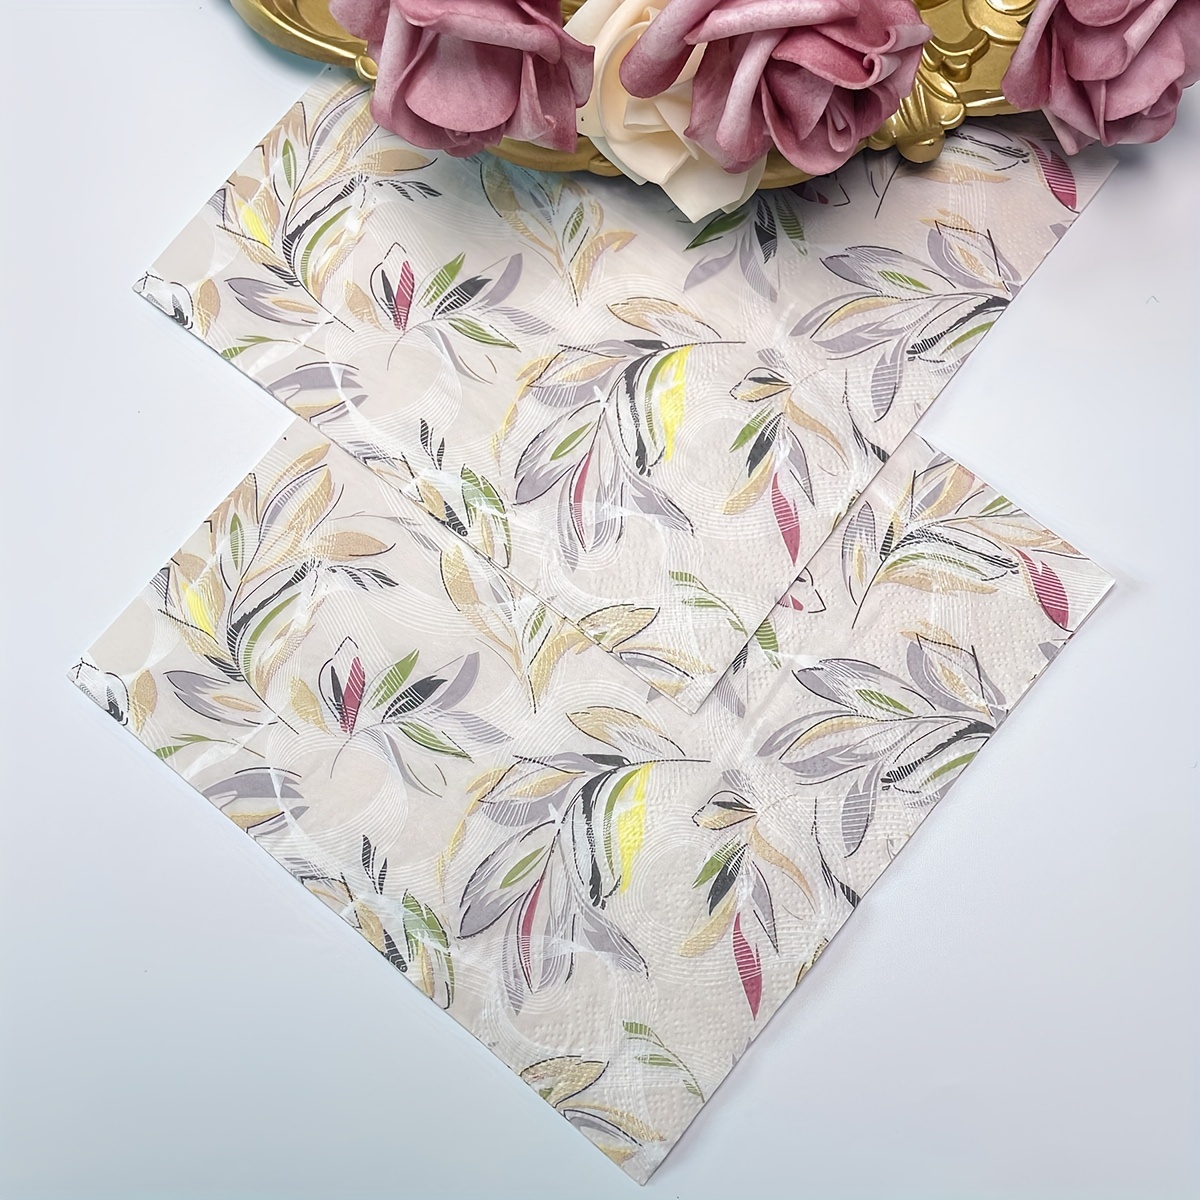 Lot of 14 Beautiful Botanical Paper Guest Napkins For Decoupage